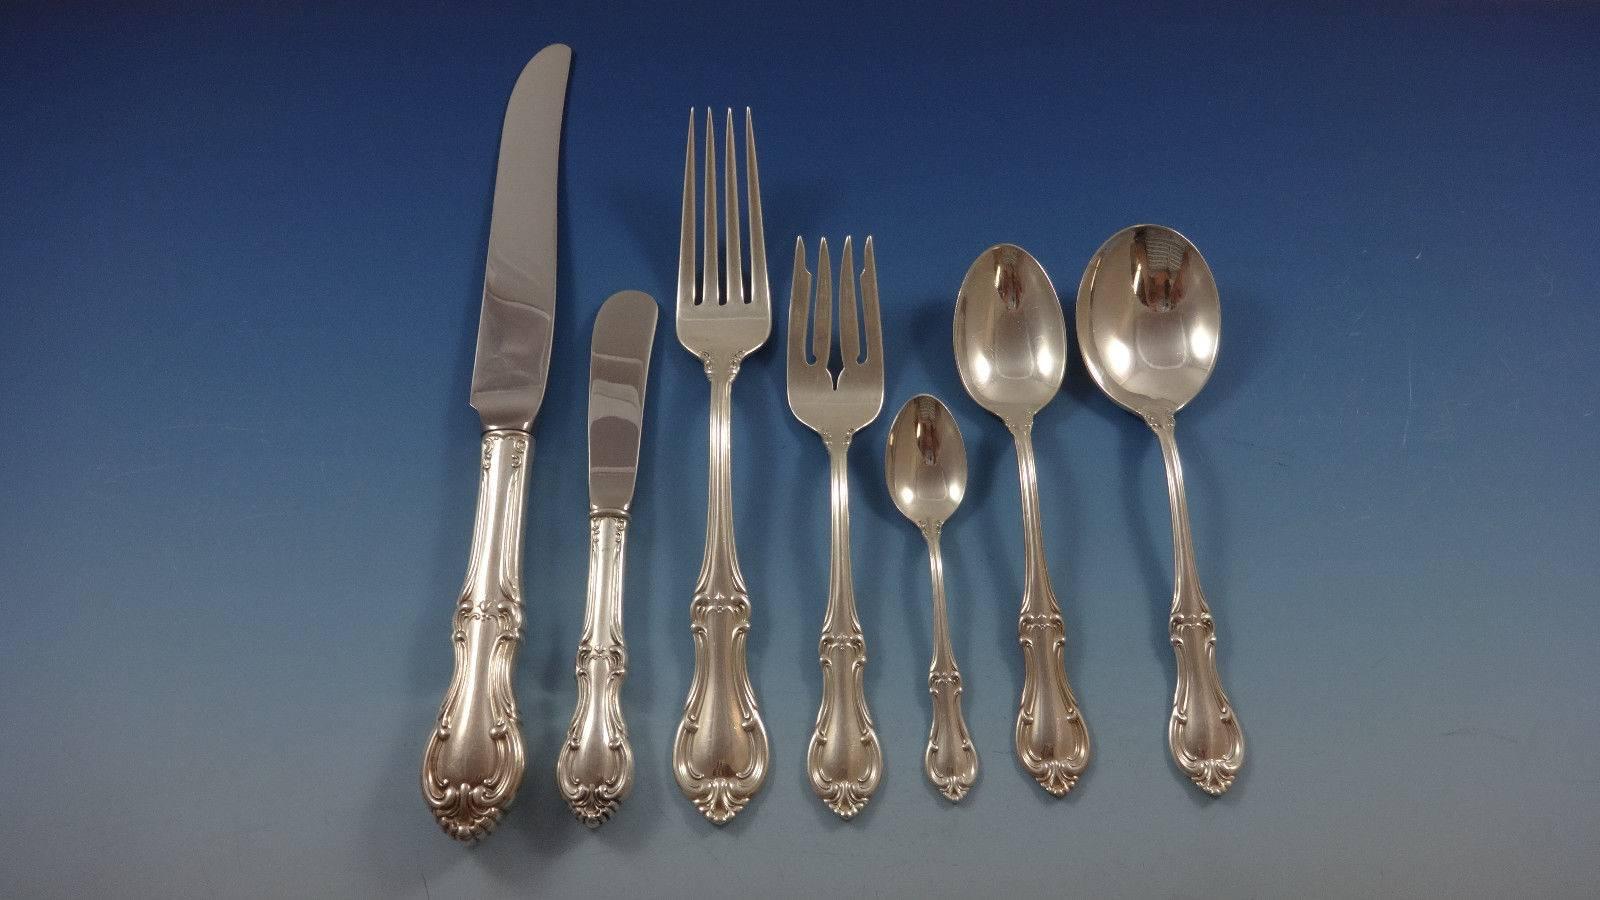 Inspired by the designs of the court of Louis XV, this sterling silver flatware pattern is as heroic and feminine as its namesake. Its traditional curves and contours are restrained by a modern touch, emphasizing the tapered slenderness of the